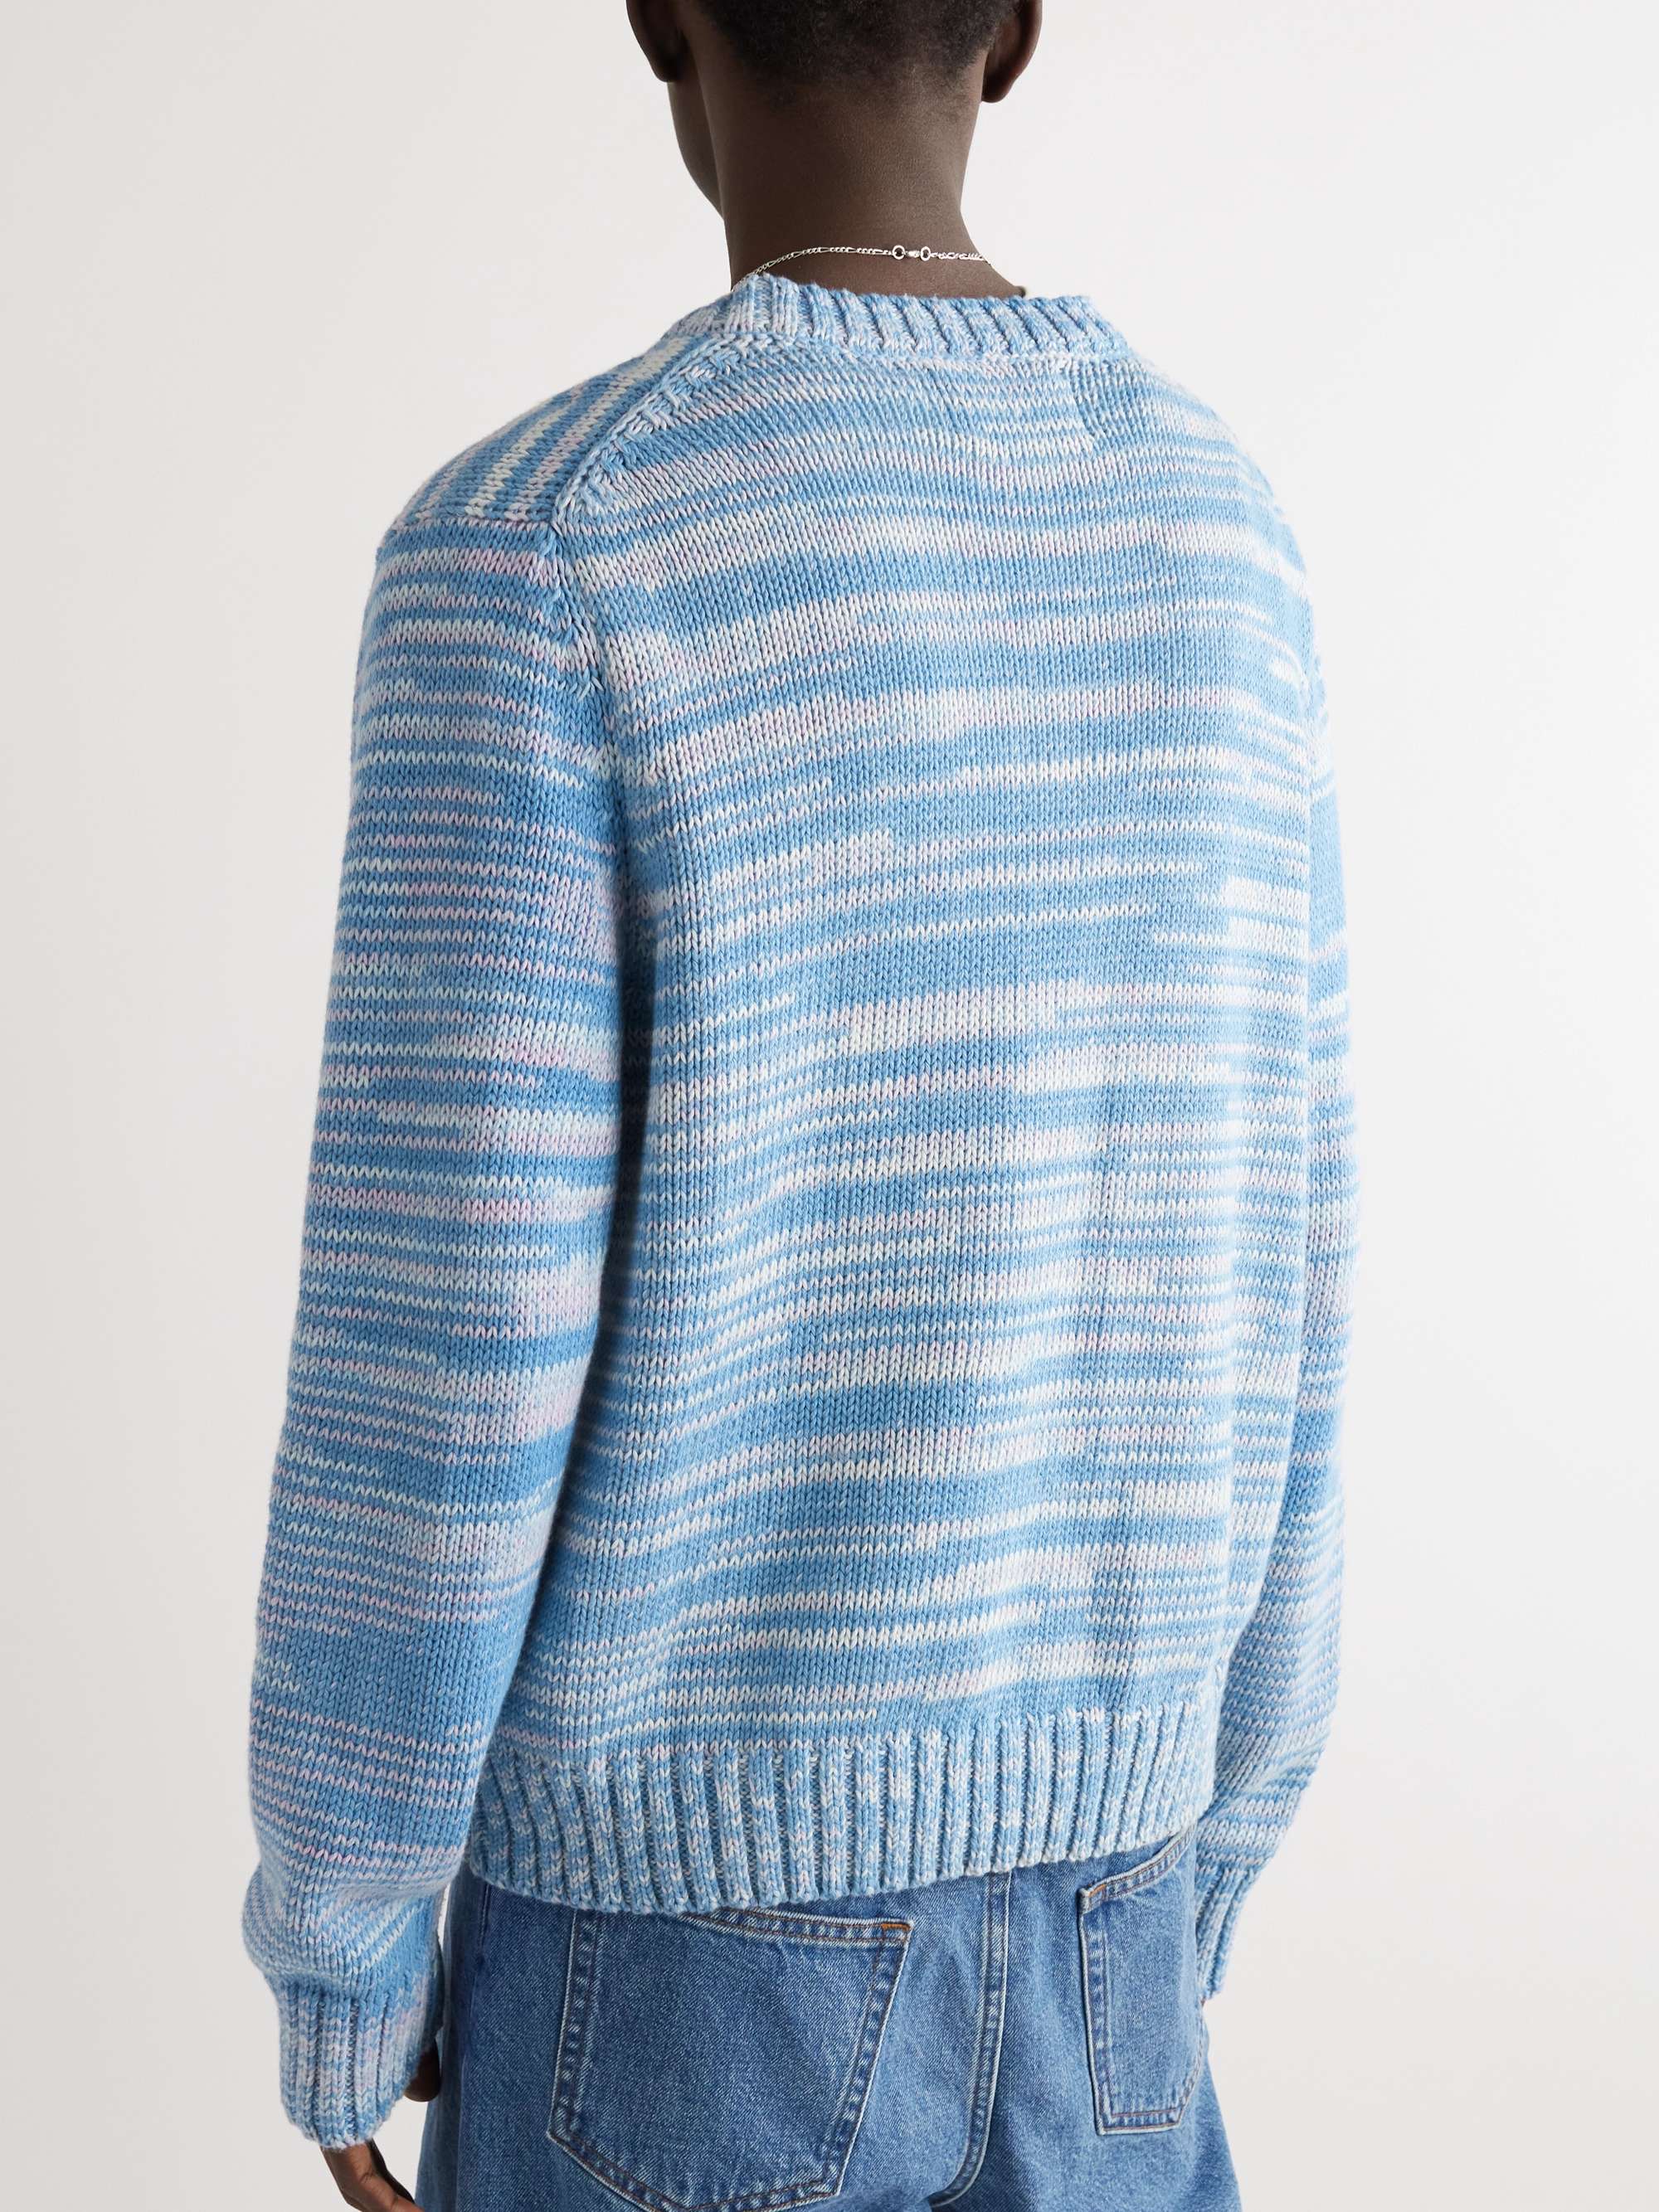 CORRIDOR Space-Dyed Cotton Sweater